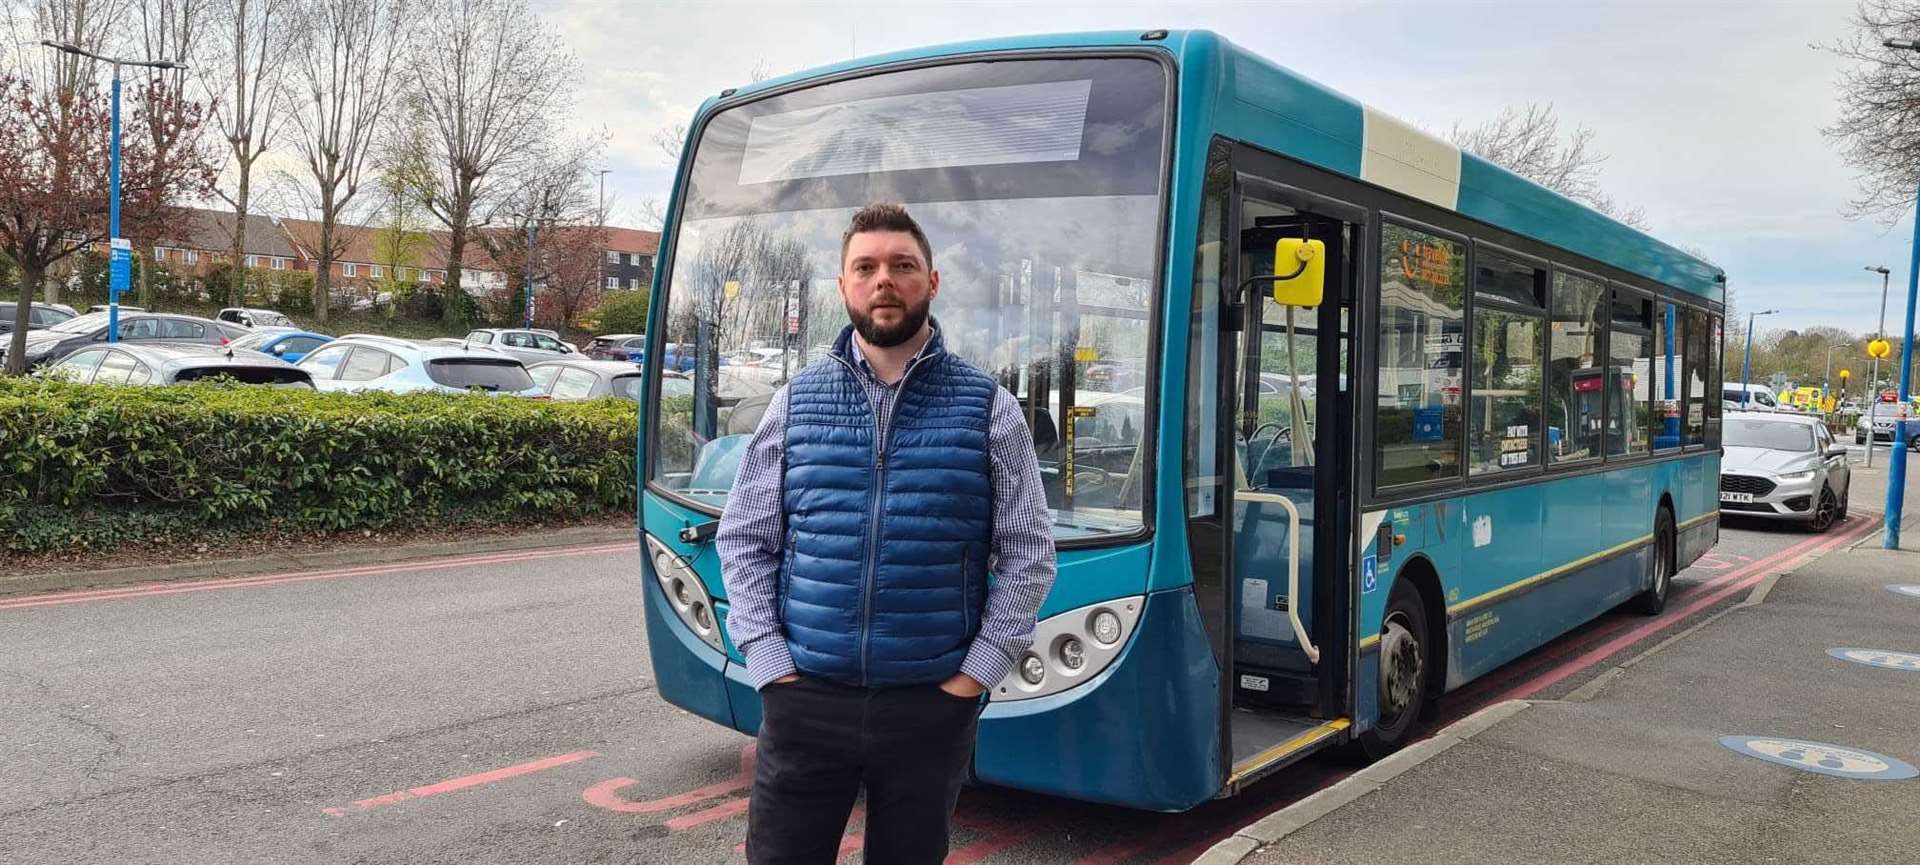 Cllr Peter Holmes: Never mind the buses